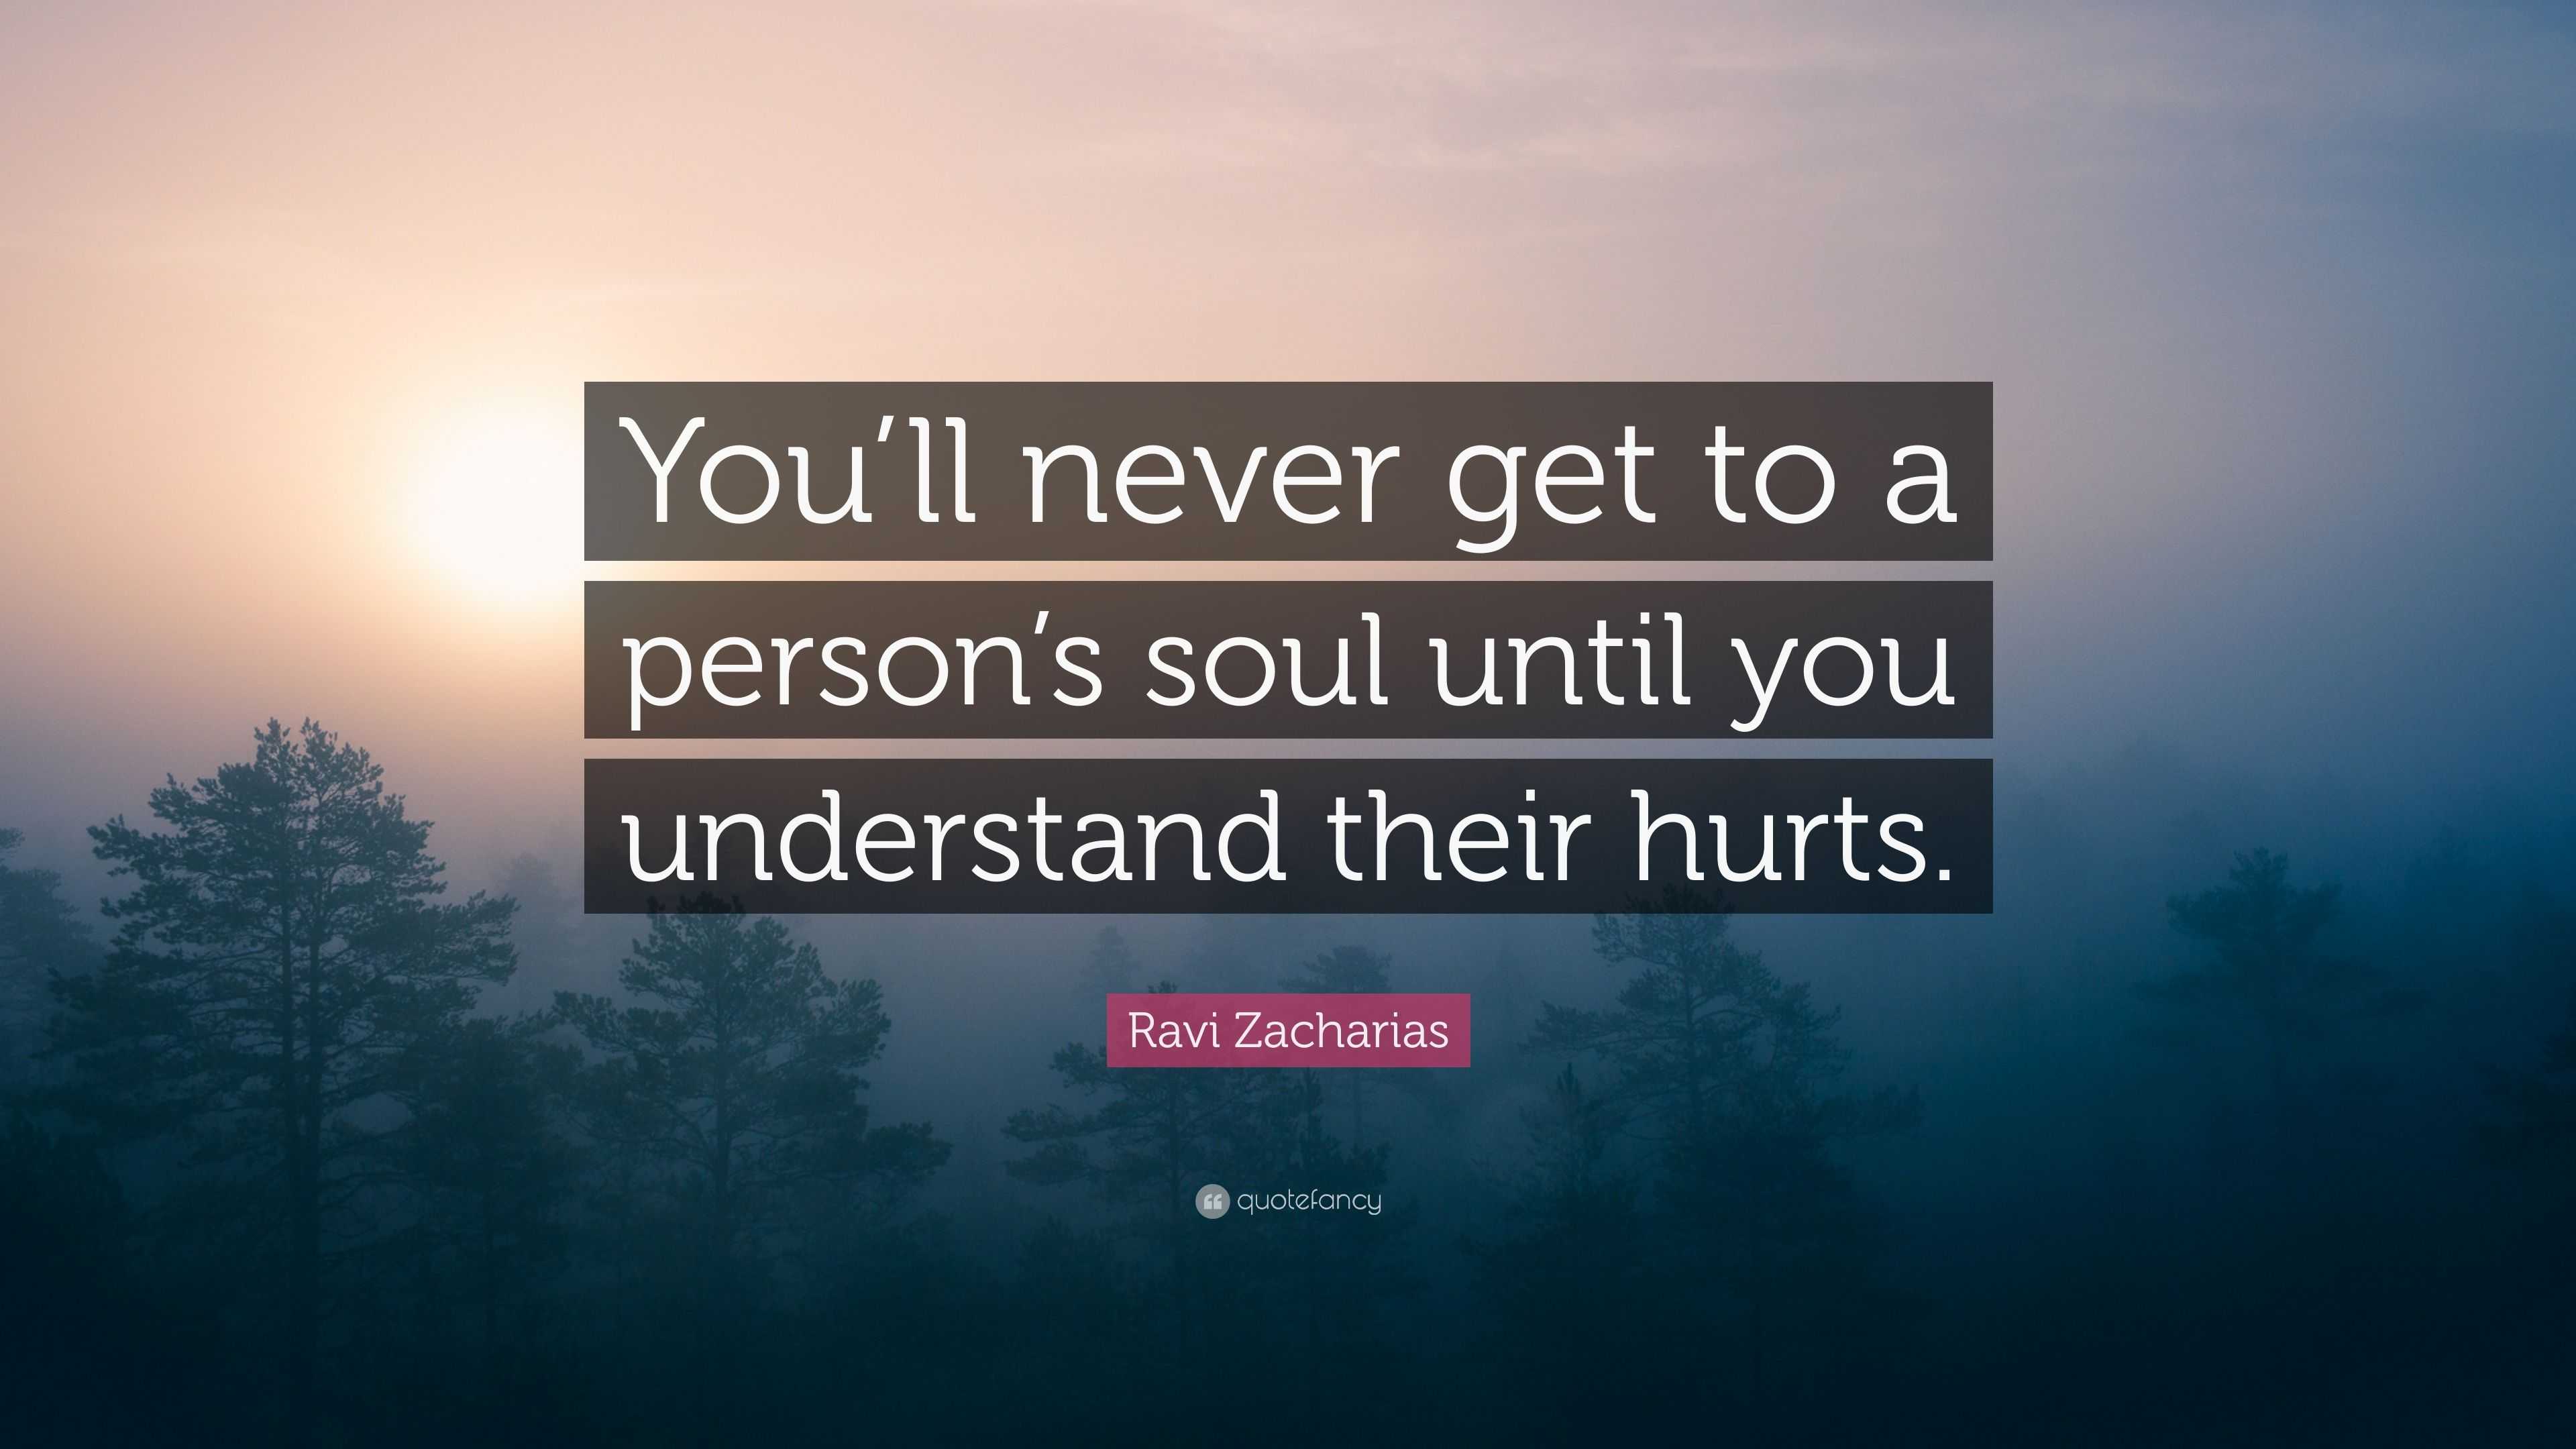 Ravi Zacharias Quote: “You’ll never get to a person’s soul until you ...